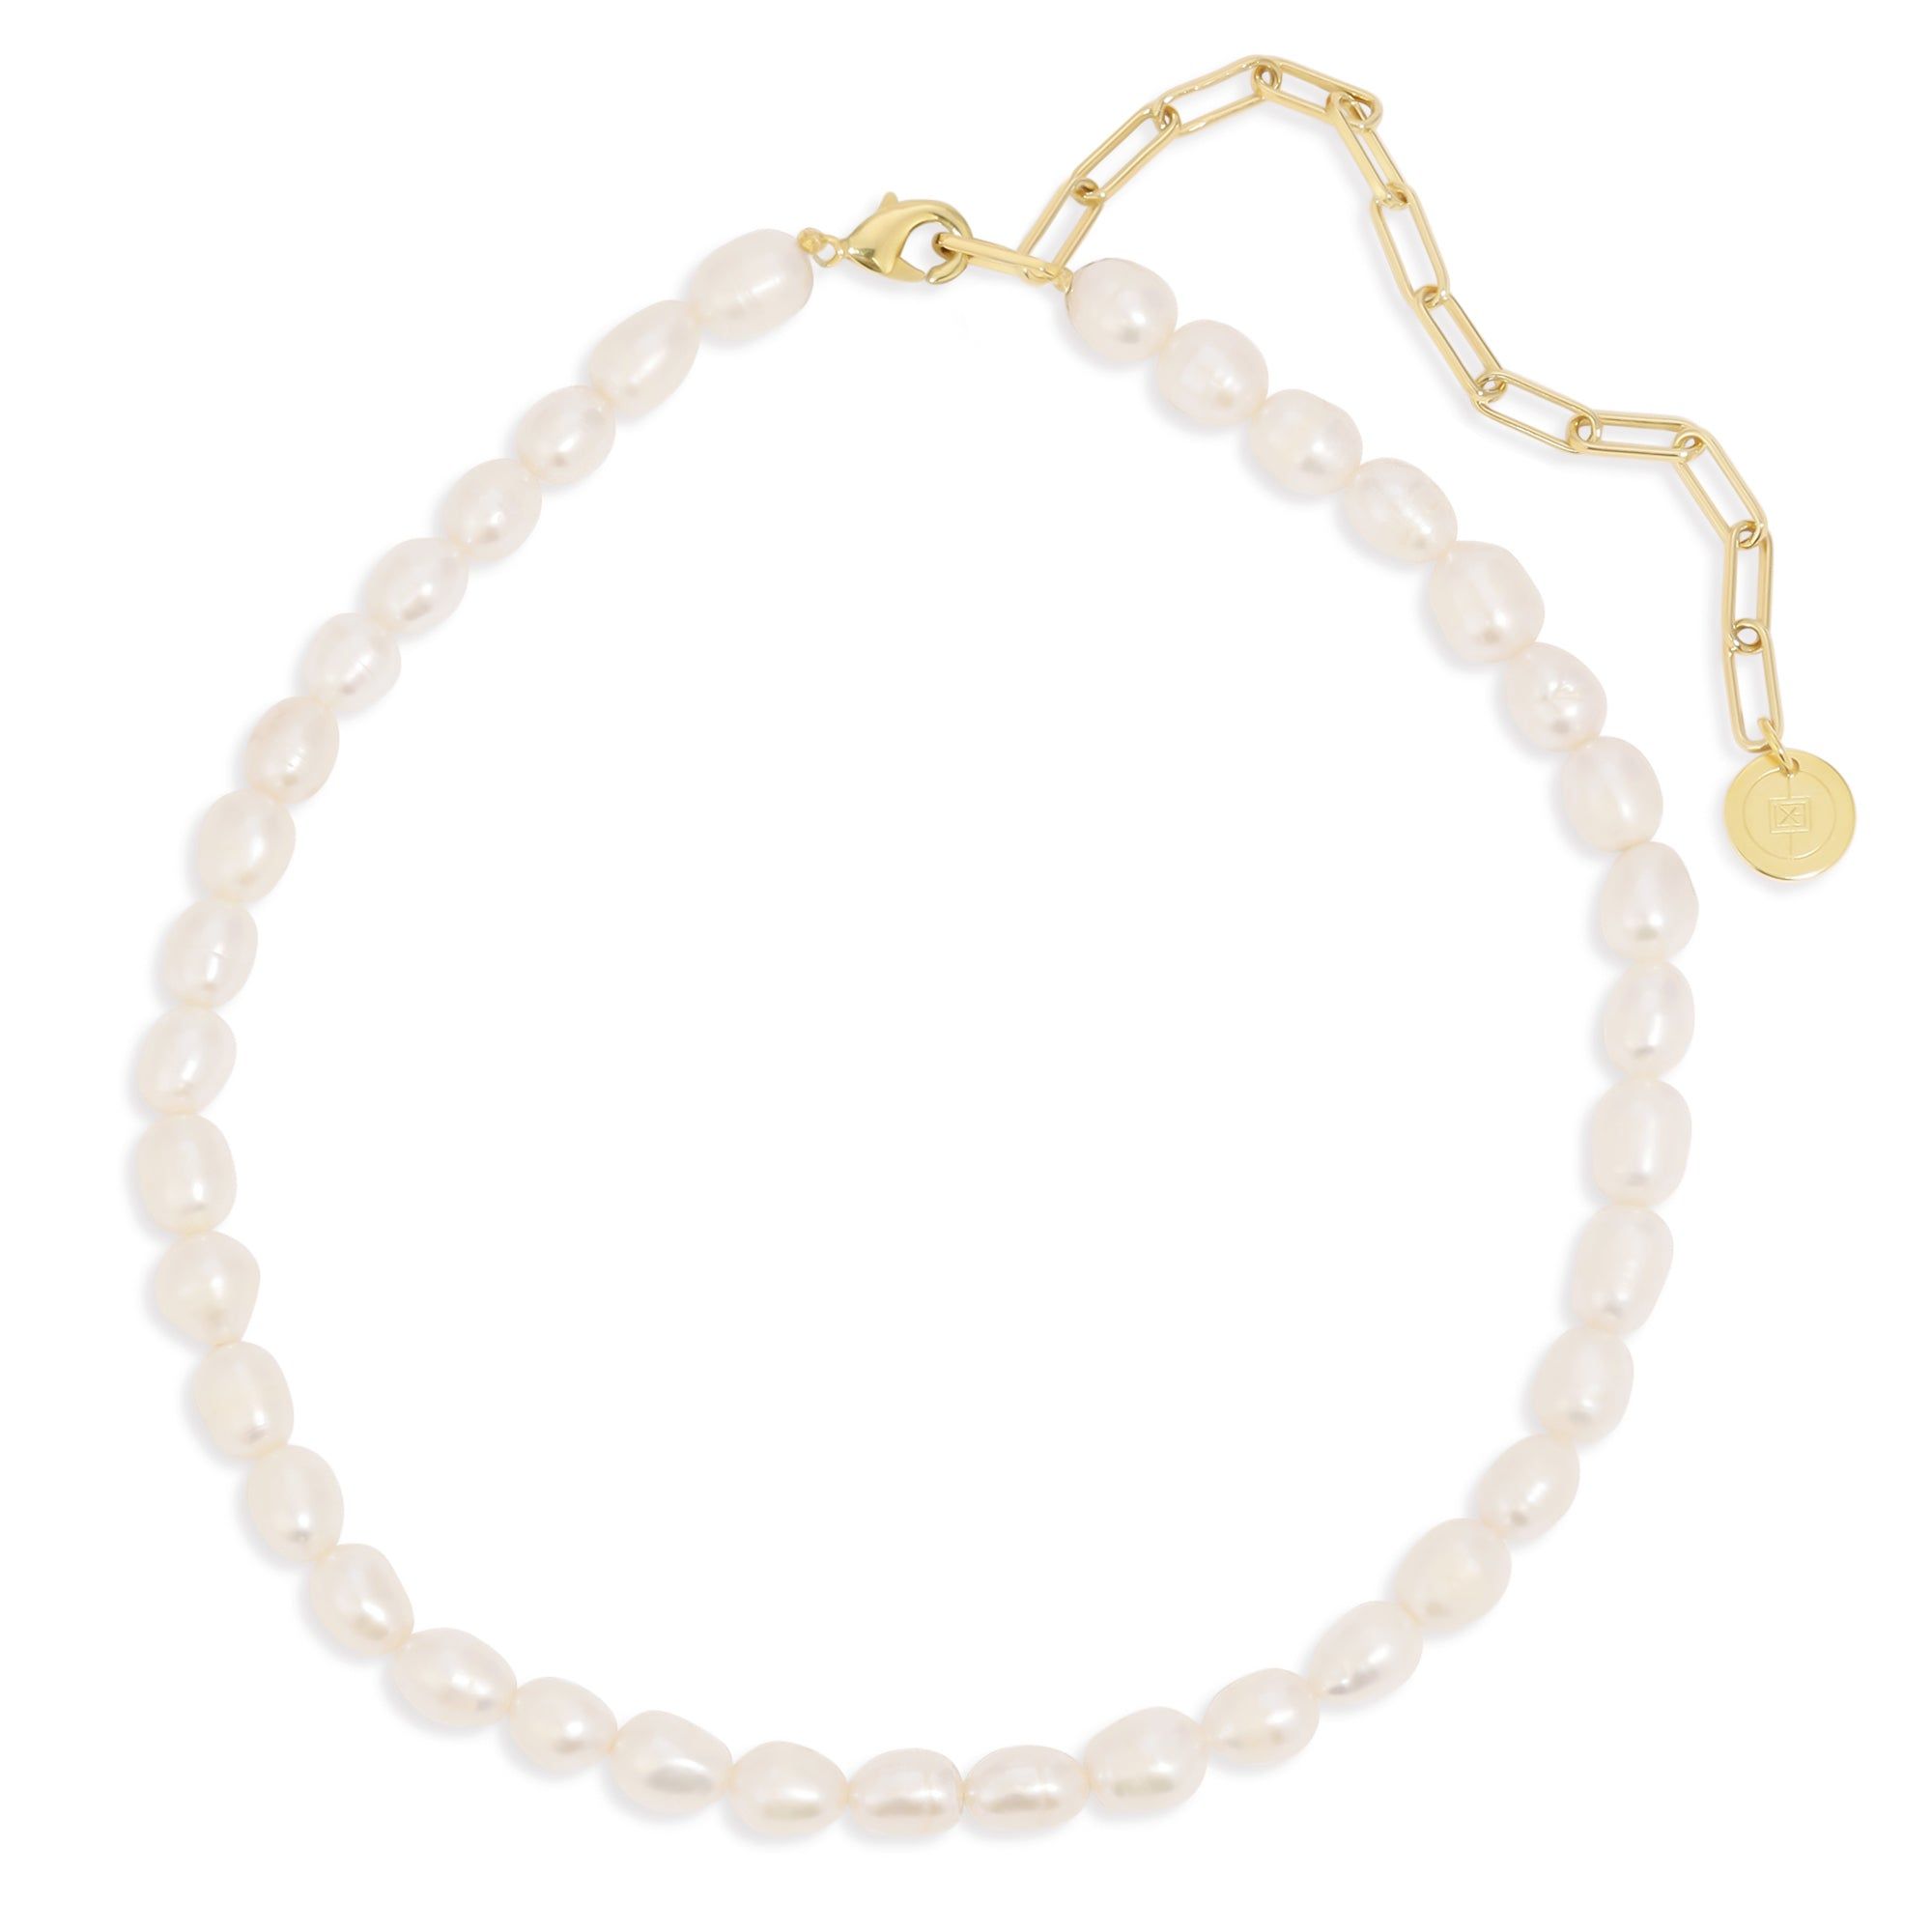 a bracelet with pearls and a gold charm